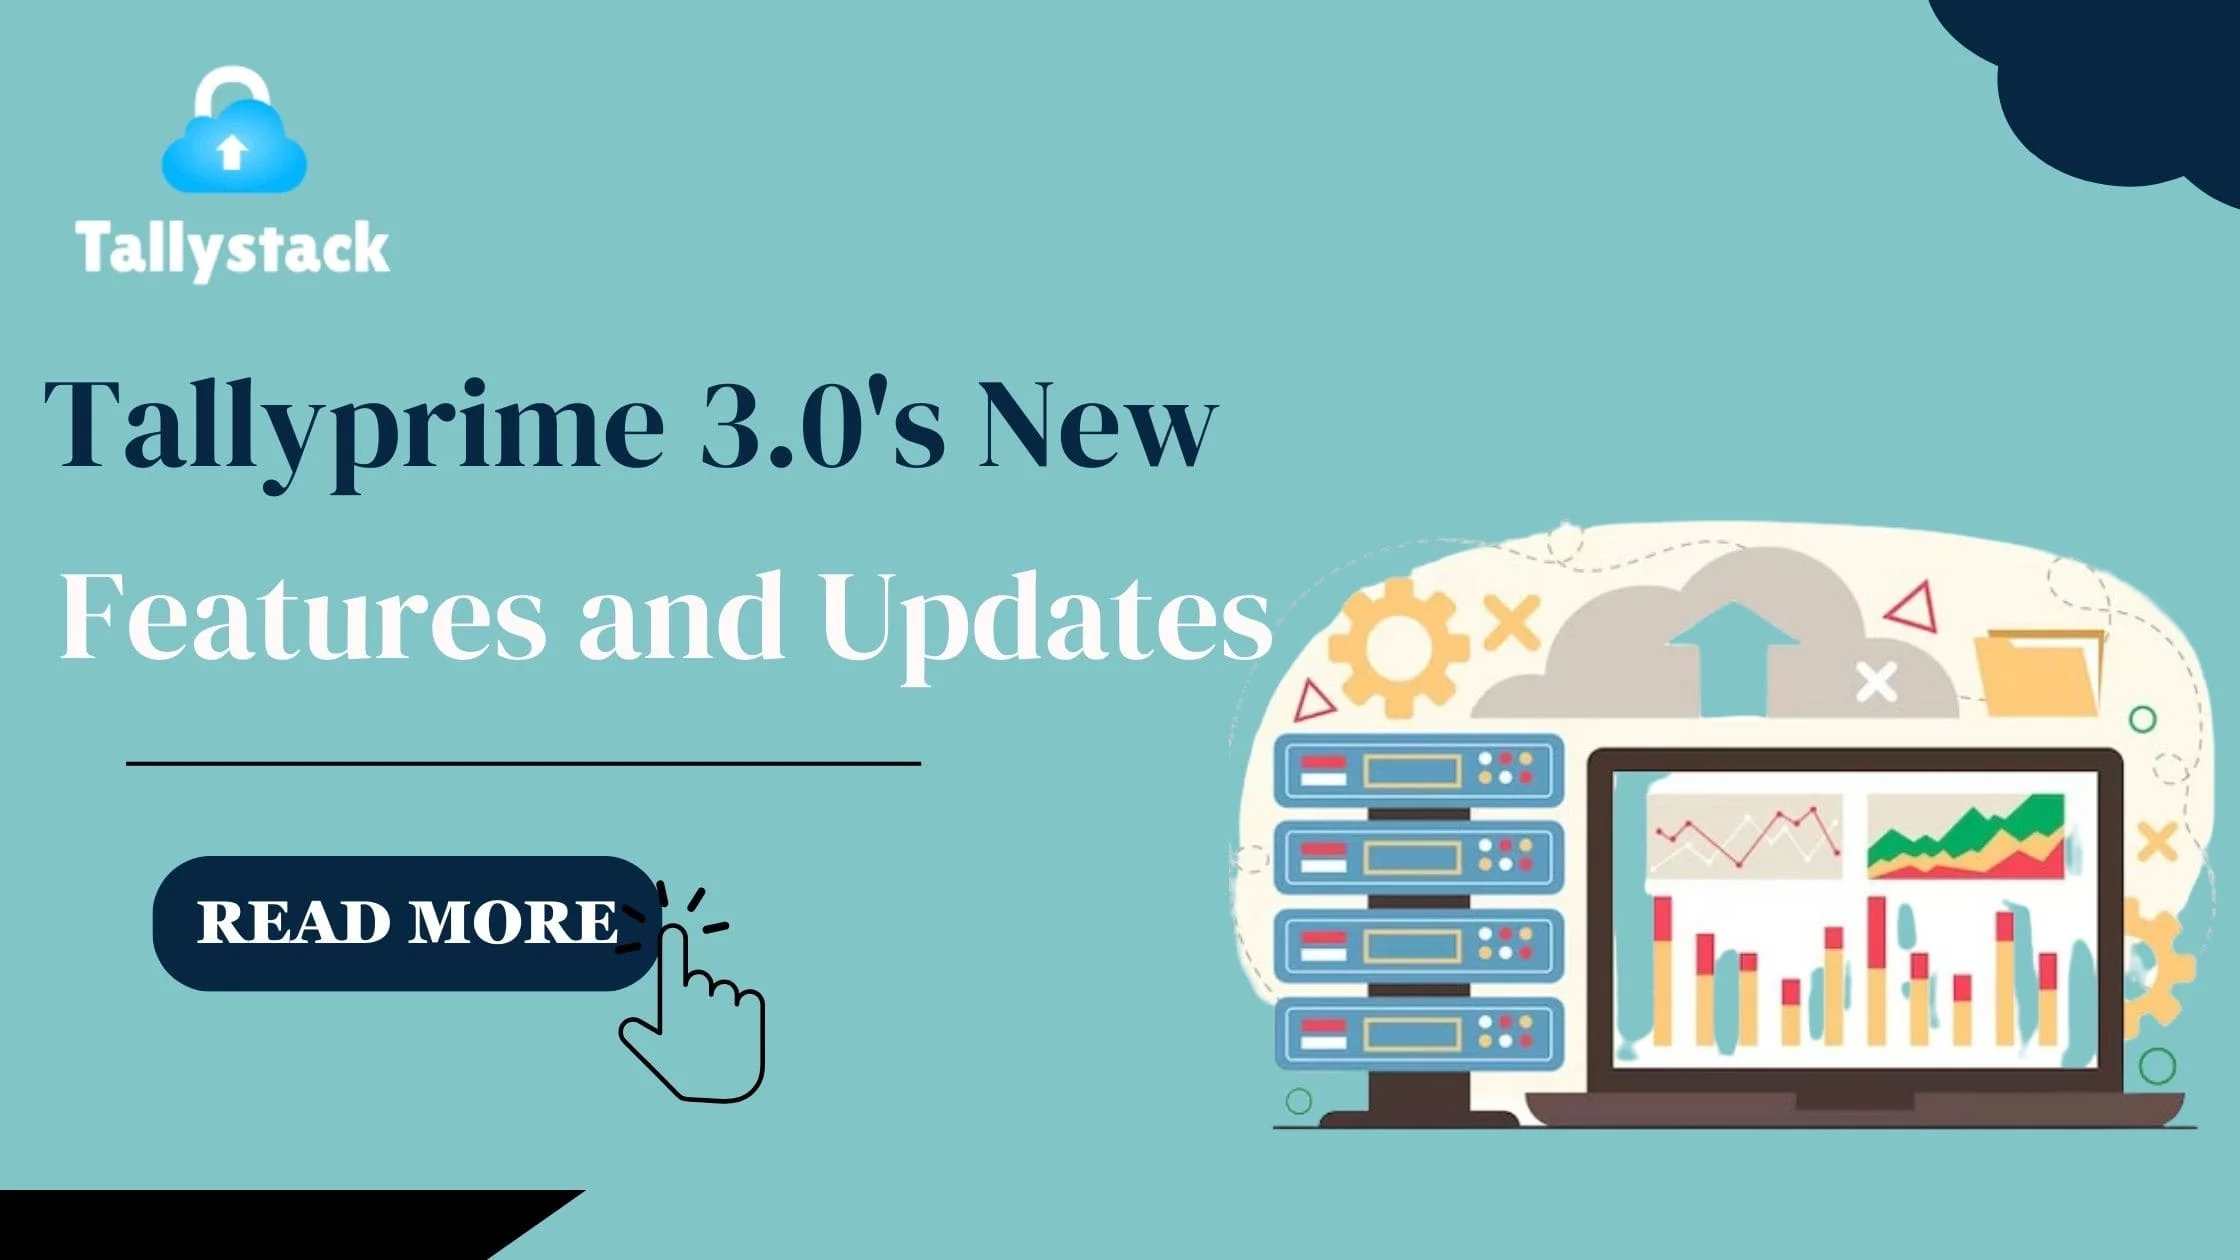 TallyPrime 3.0 introduces new features and updates, enhancing user experience and efficiency.